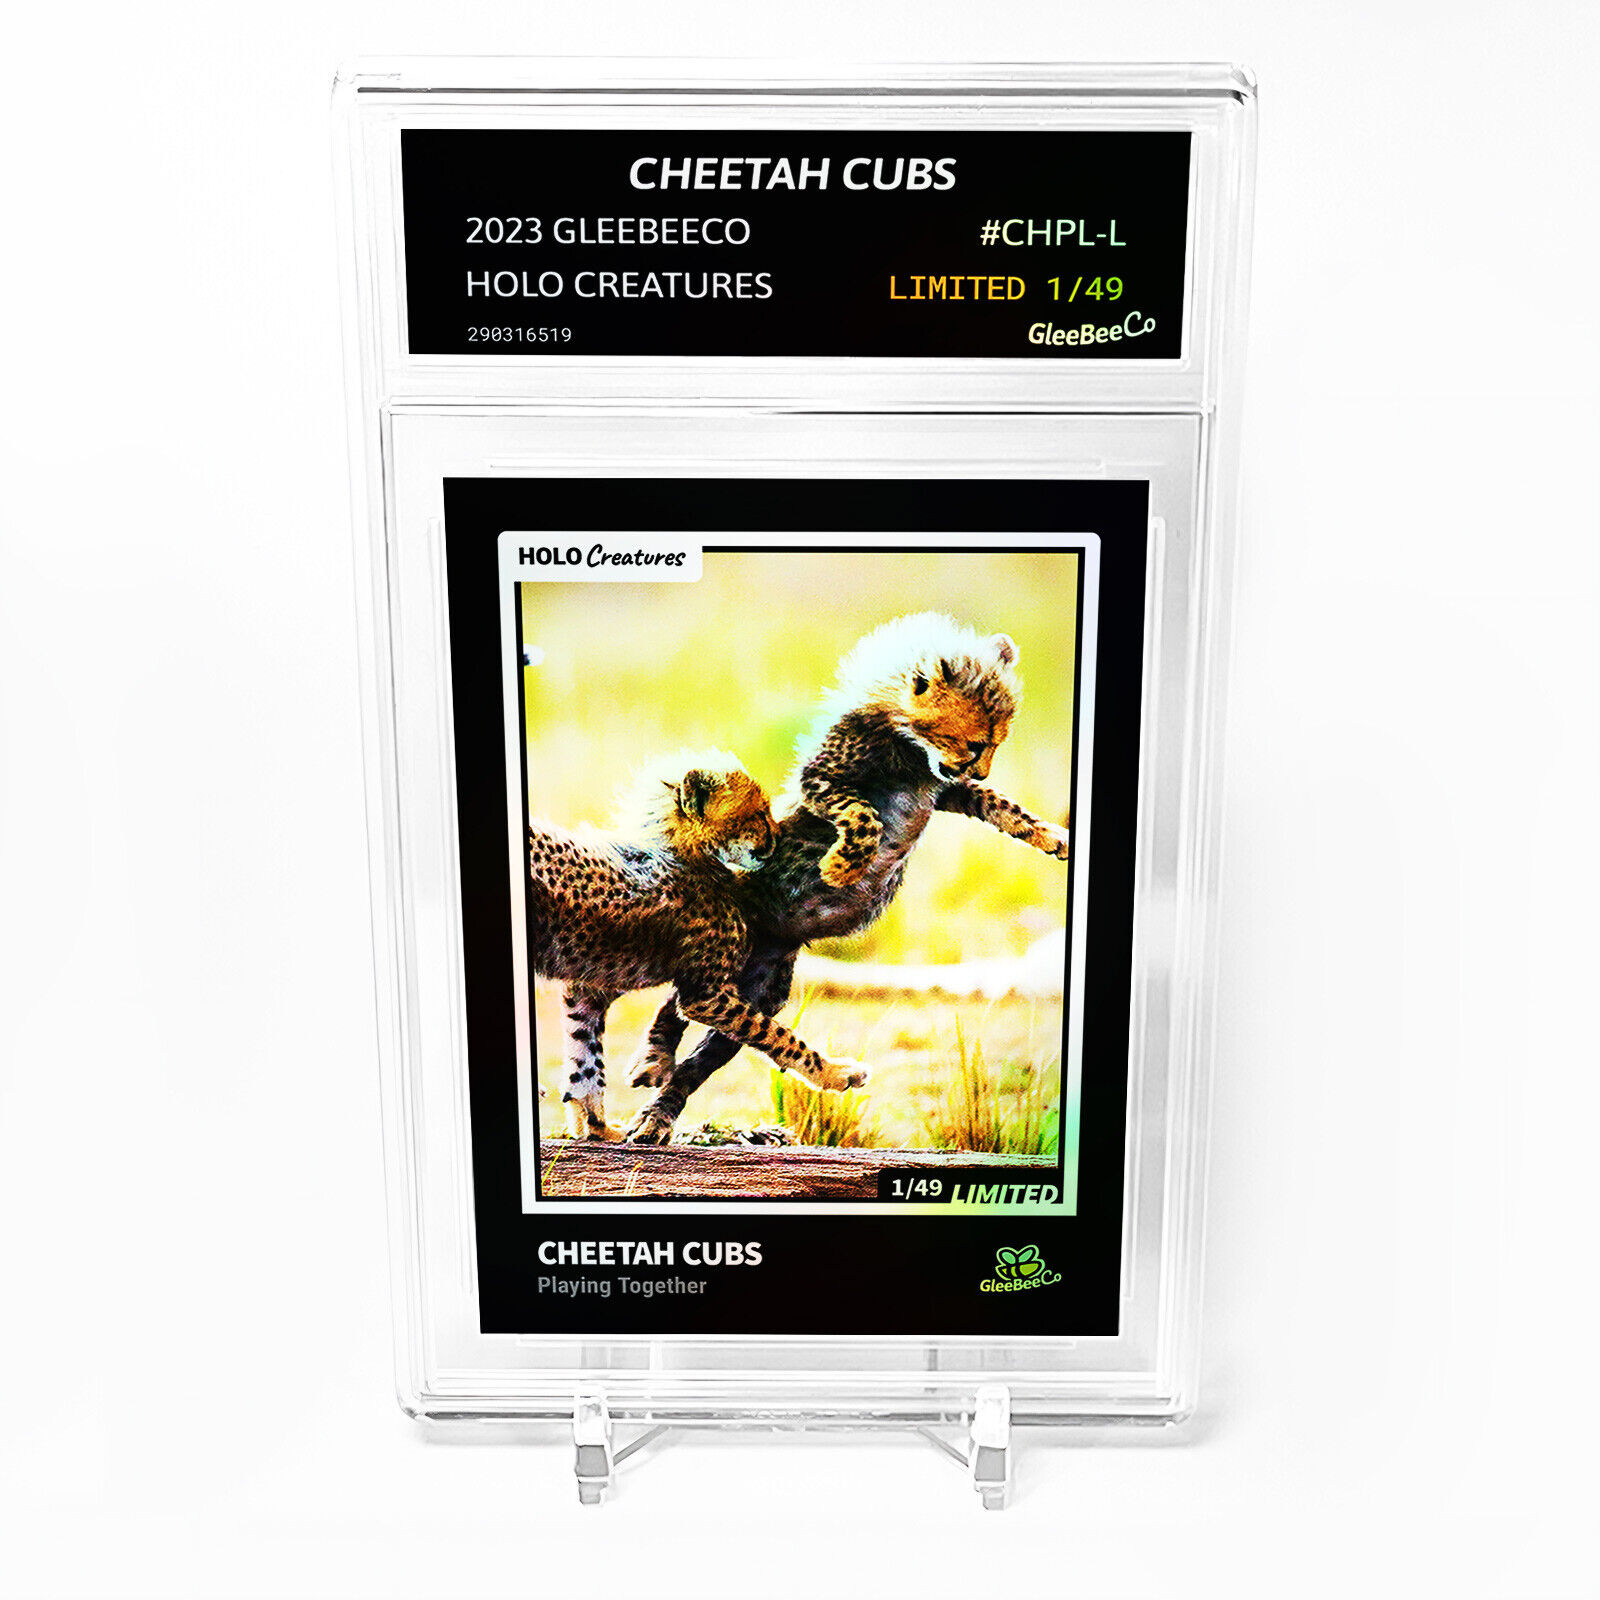 CHEETAH CUBS Card 2023 GleeBeeCo Holo Creatures Playing Together #CHPL-L /49